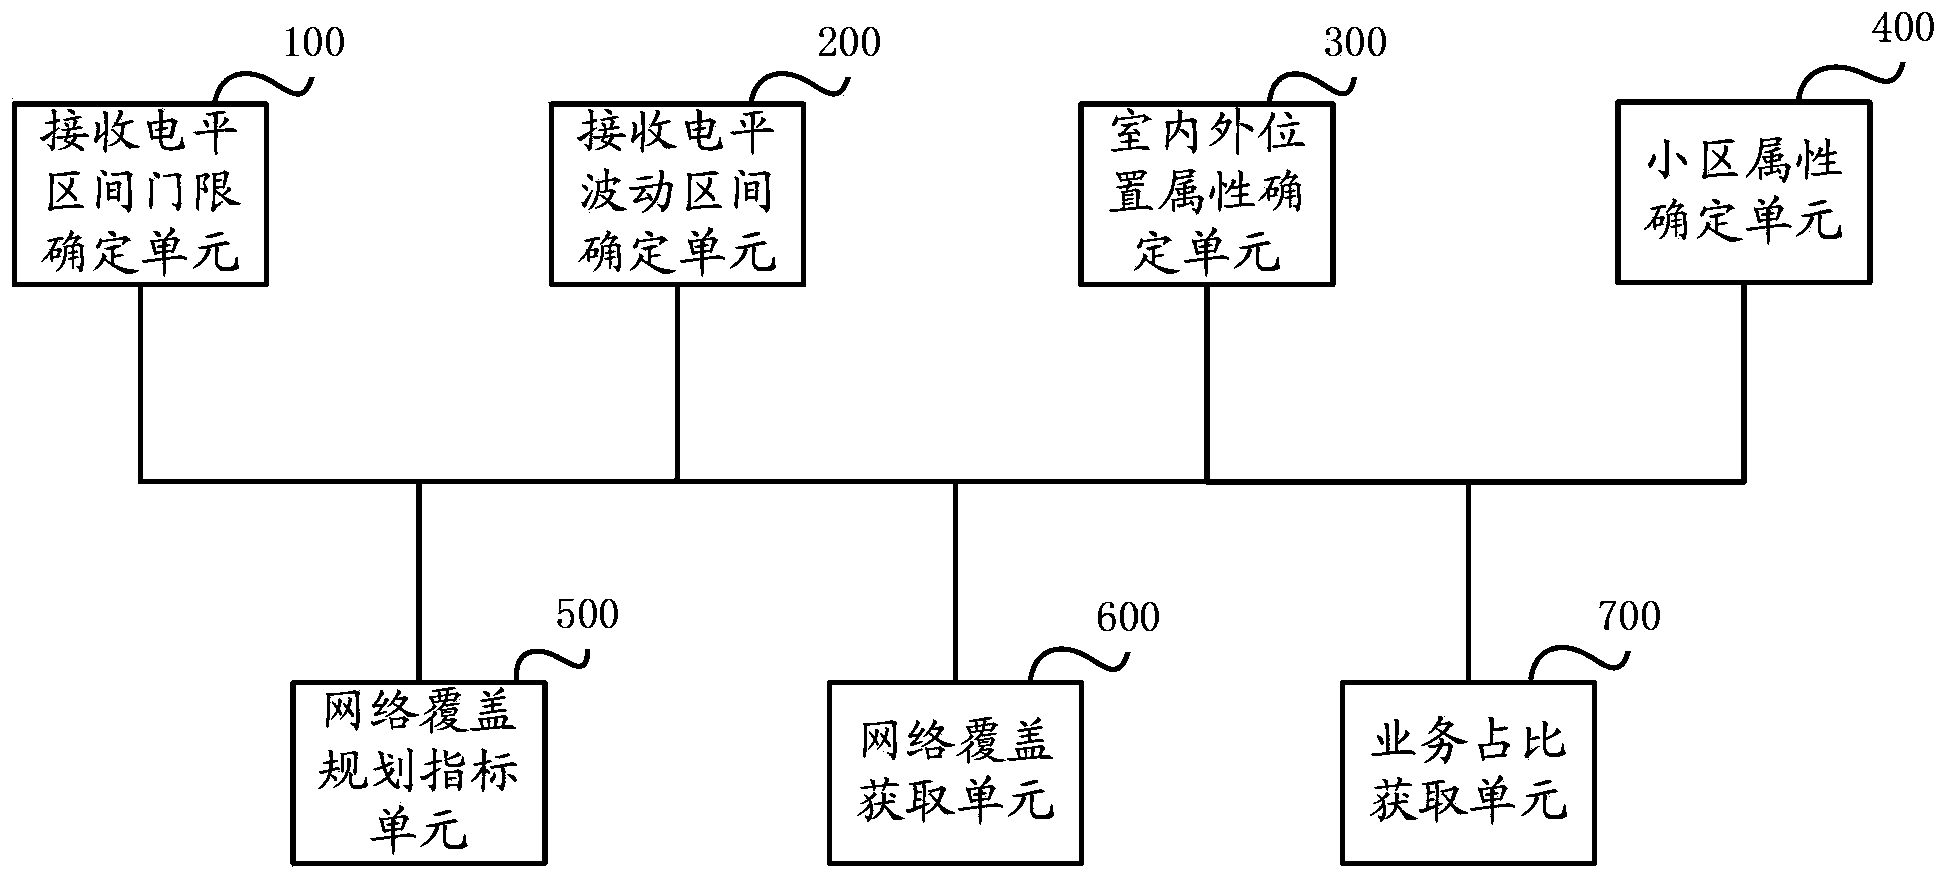 Network covering plan index analysis method and system